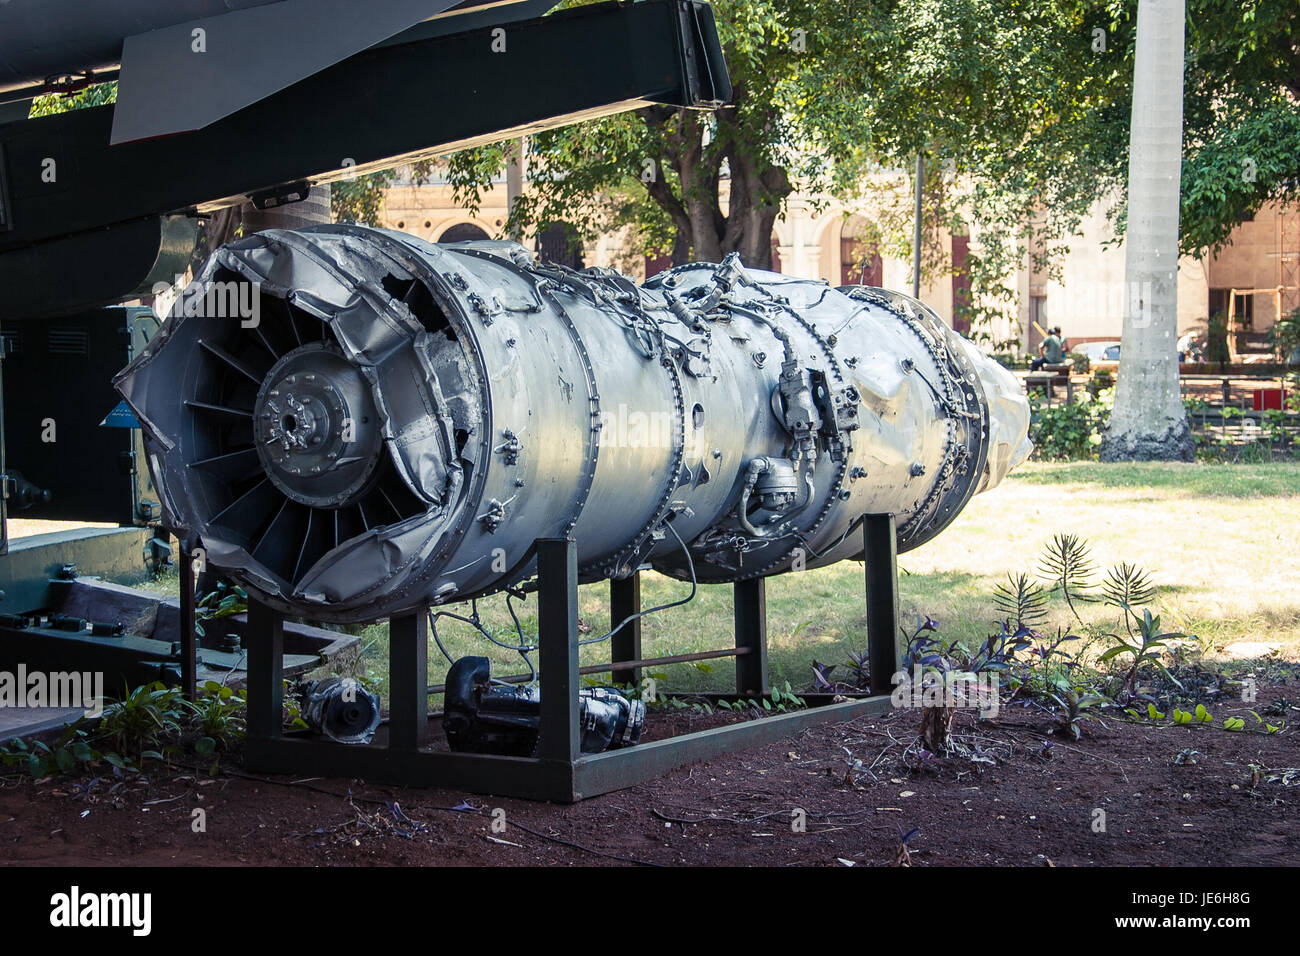 The engine from the USAF Lockheed U-2F aircraft shot down over Cuba on 27 October 1962. Museum of the Revolution, Havana, Cuba Stock Photo